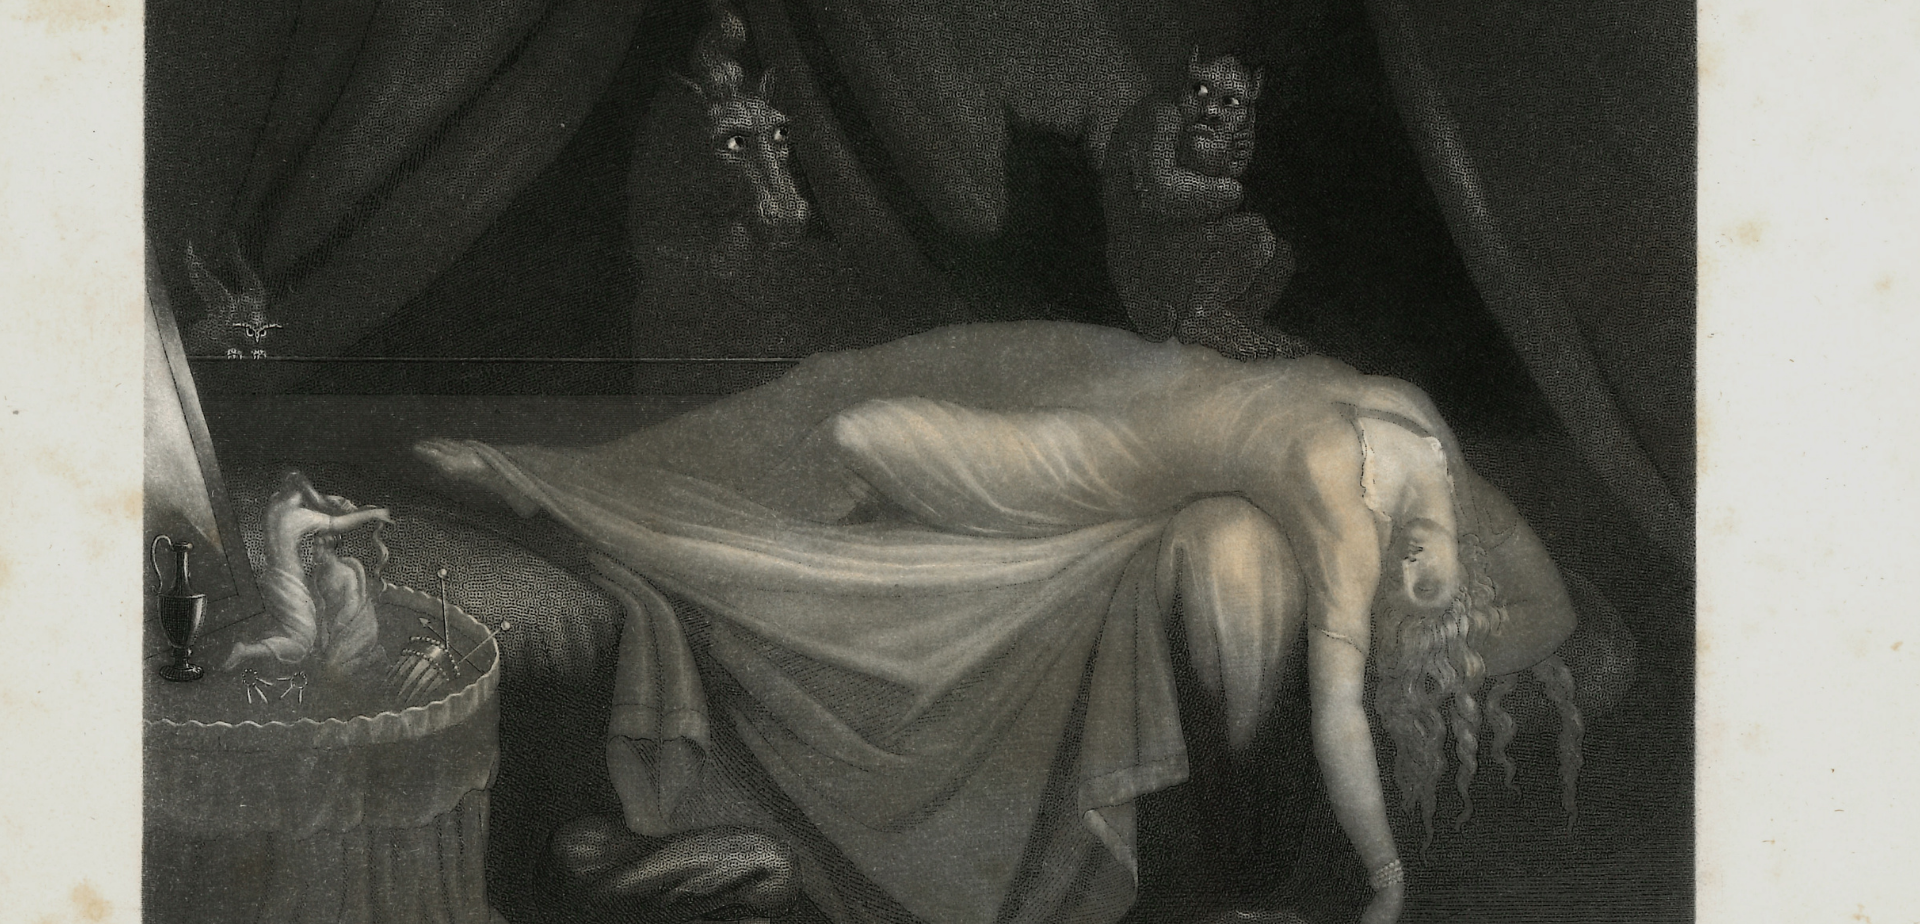 Picturing the Occult: Demons, Devils, and Witches